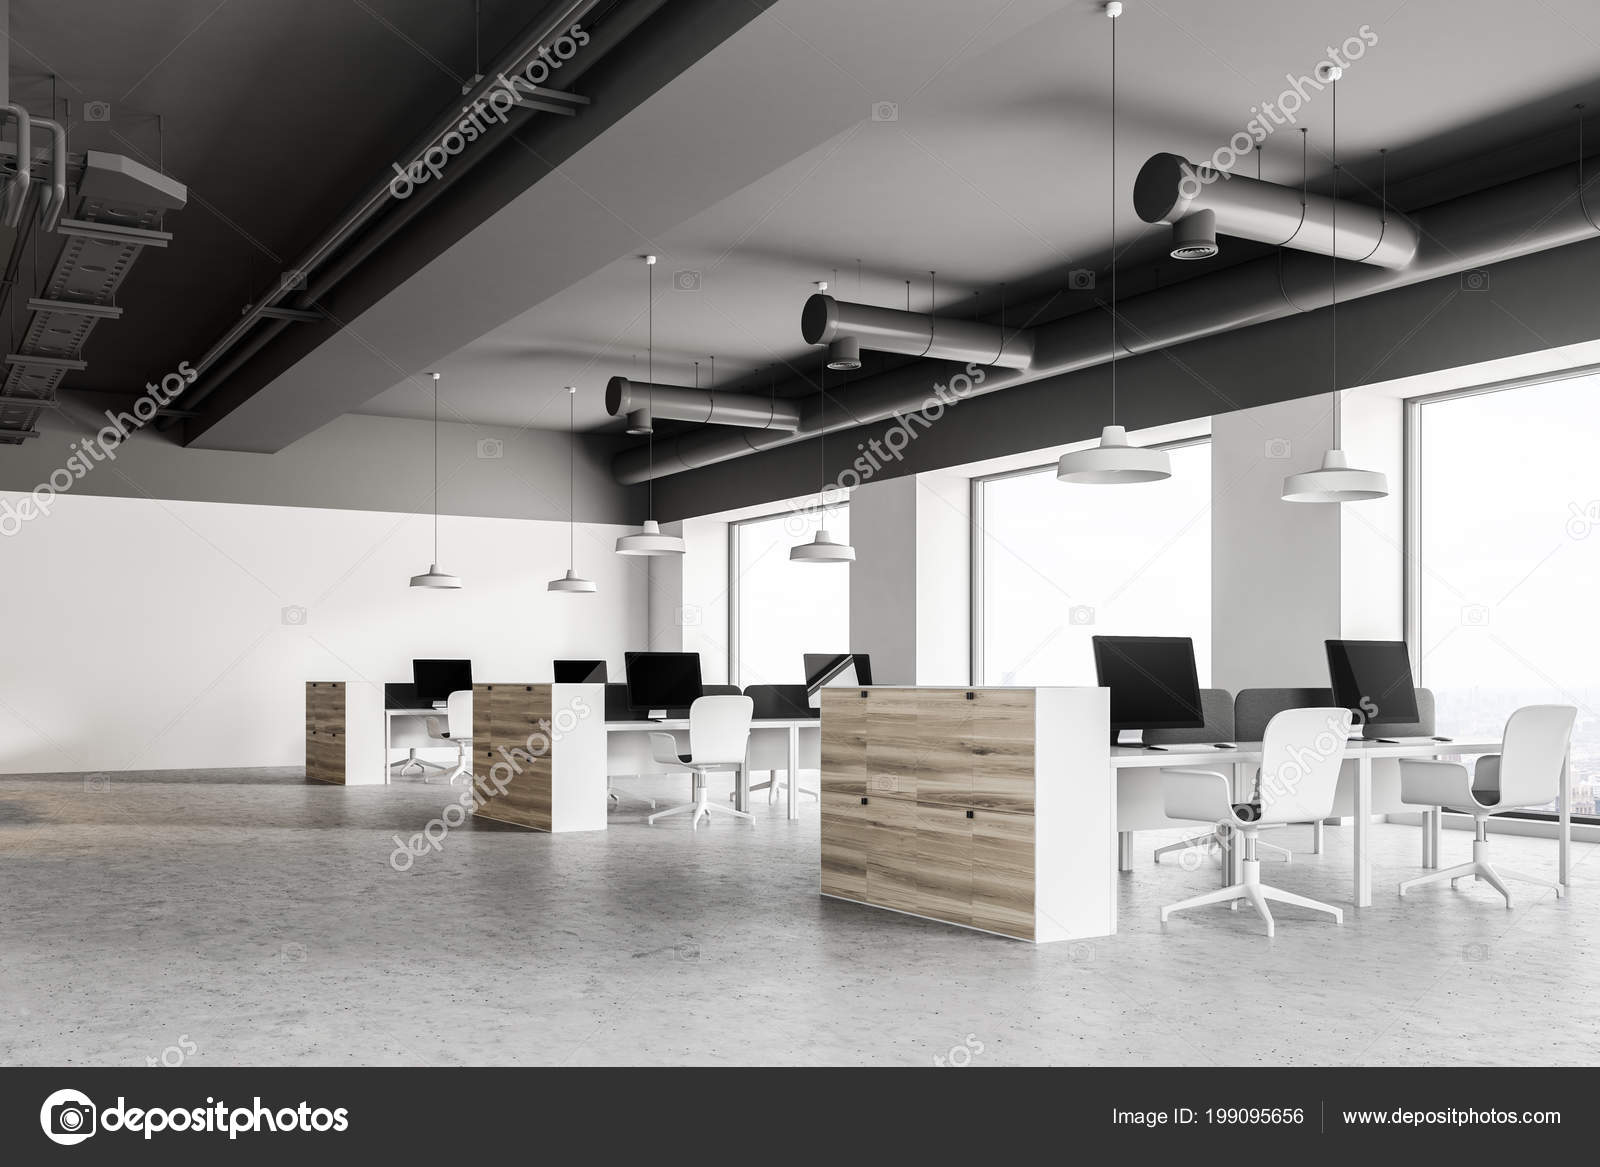 Gray Ceiling Industrial Style Office Interior Wooden Cubicles